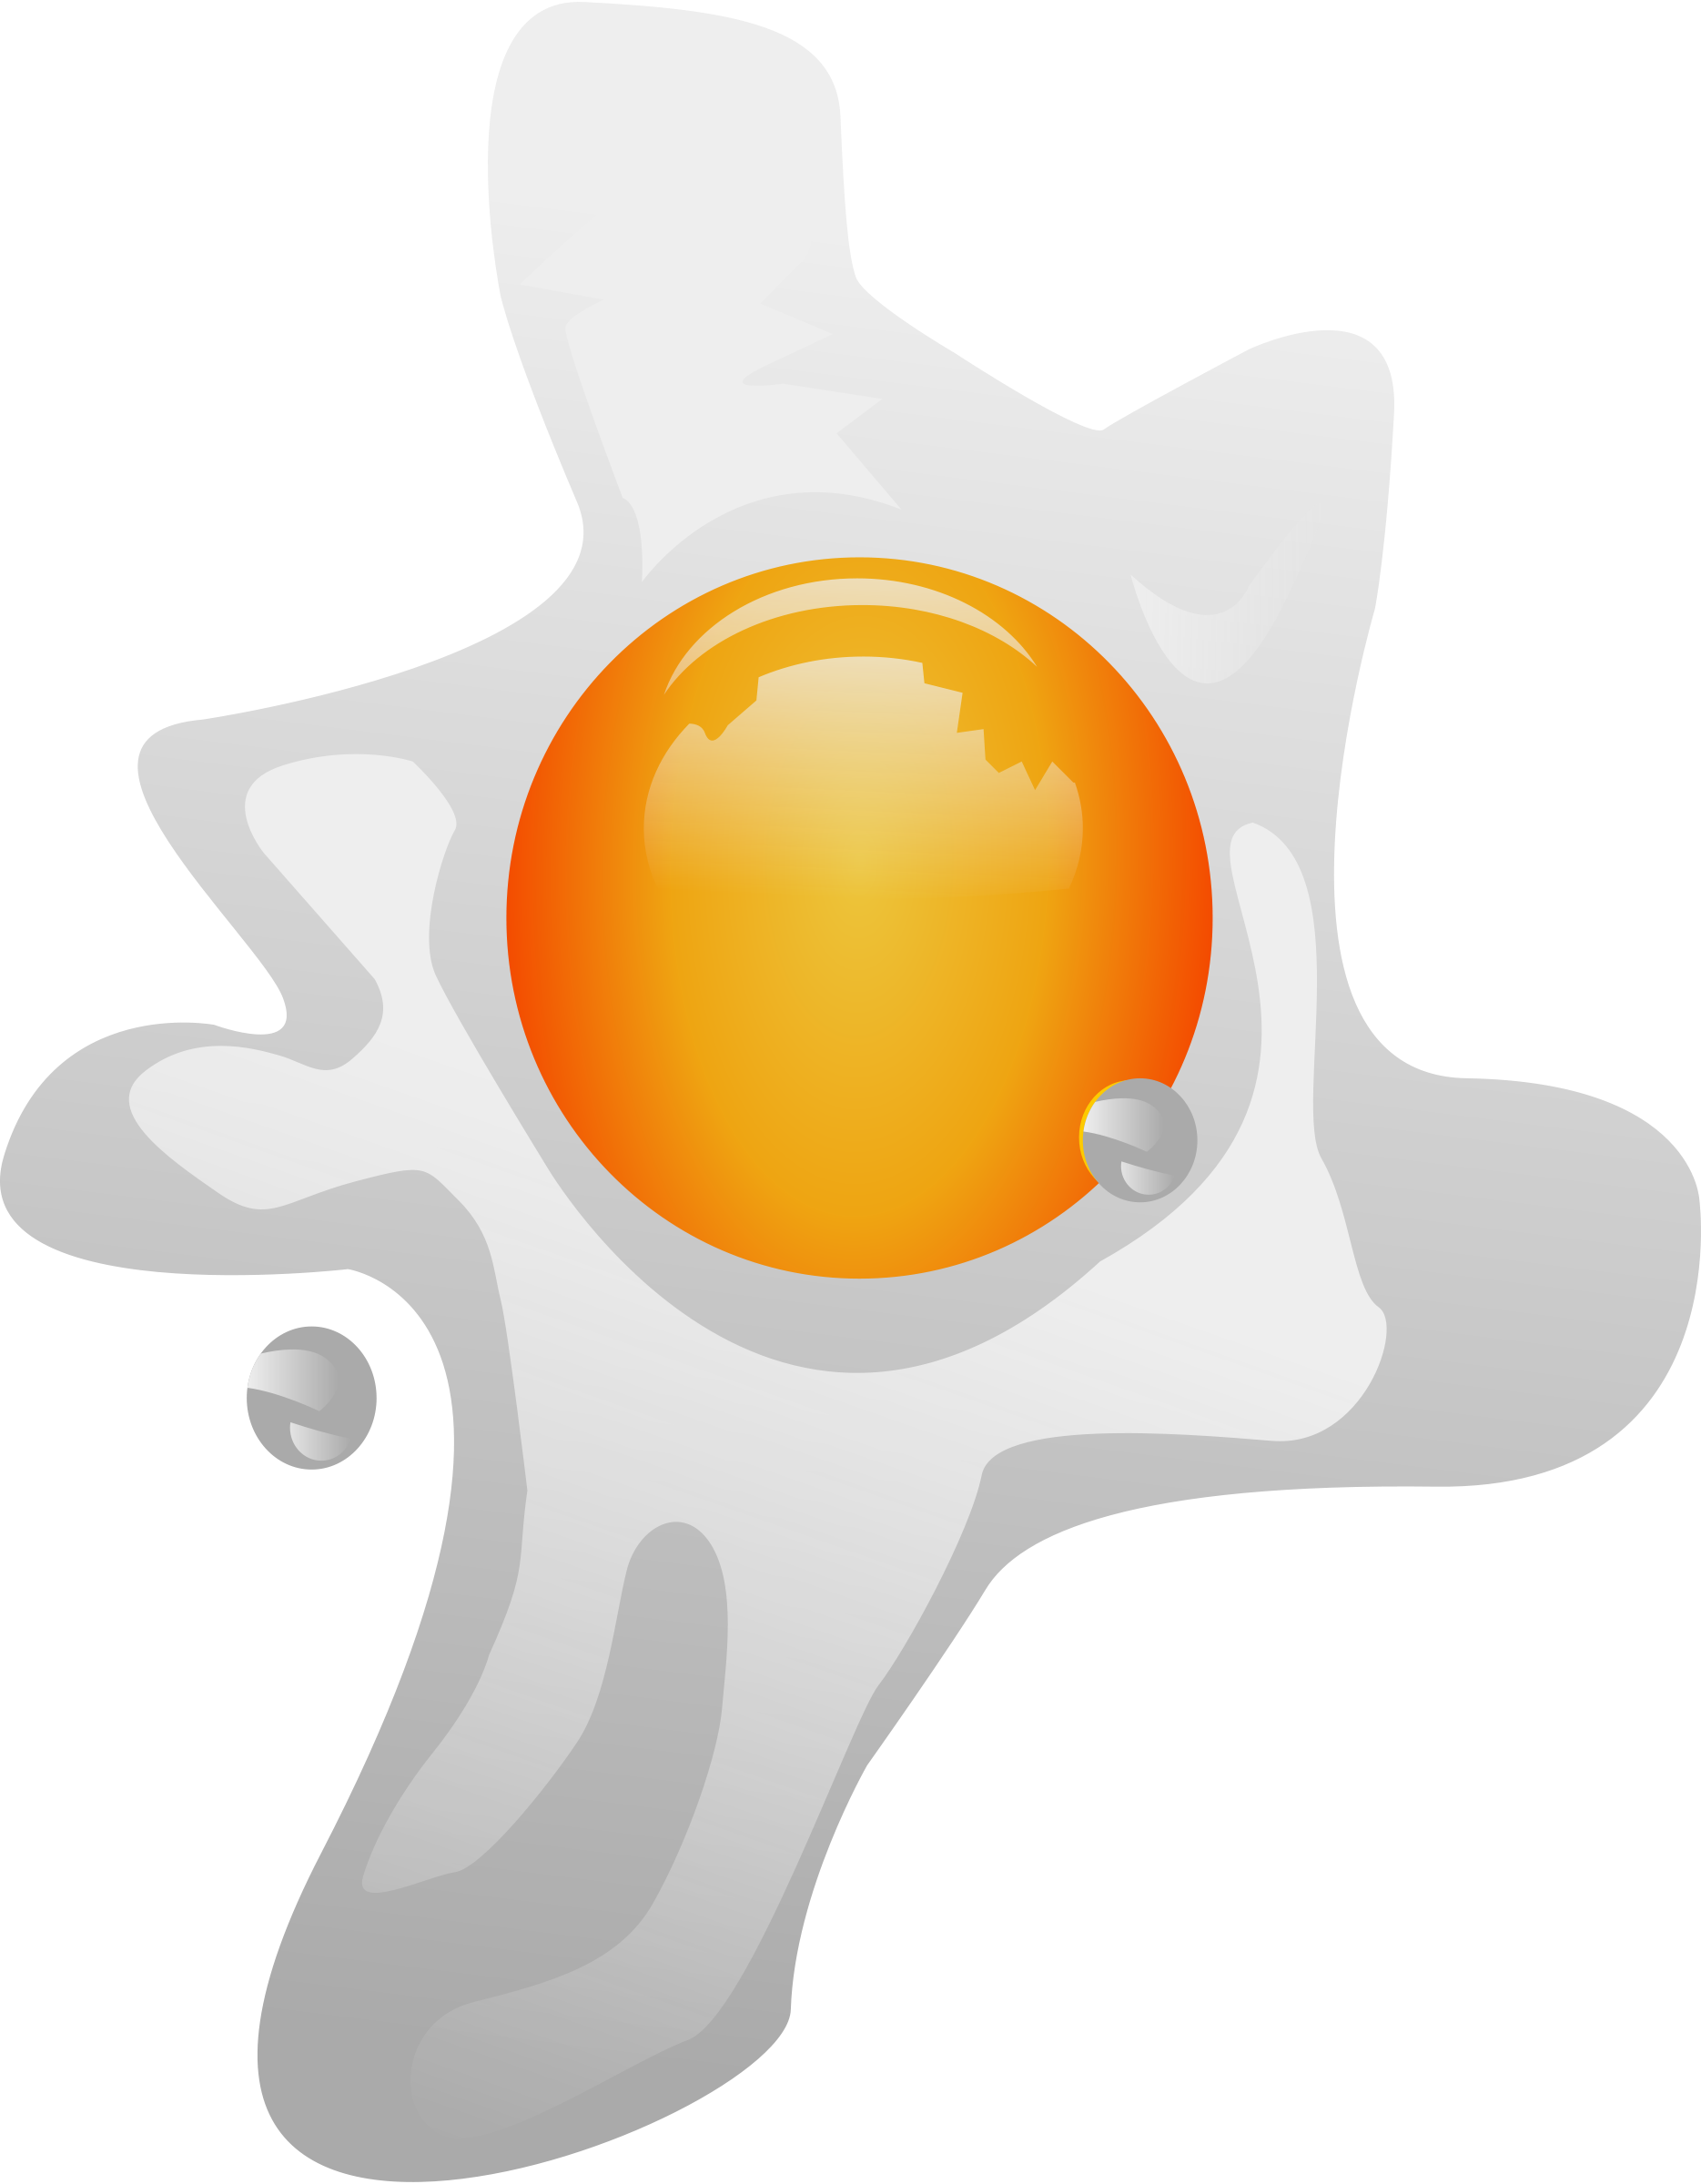 clipart images of eggs - photo #42